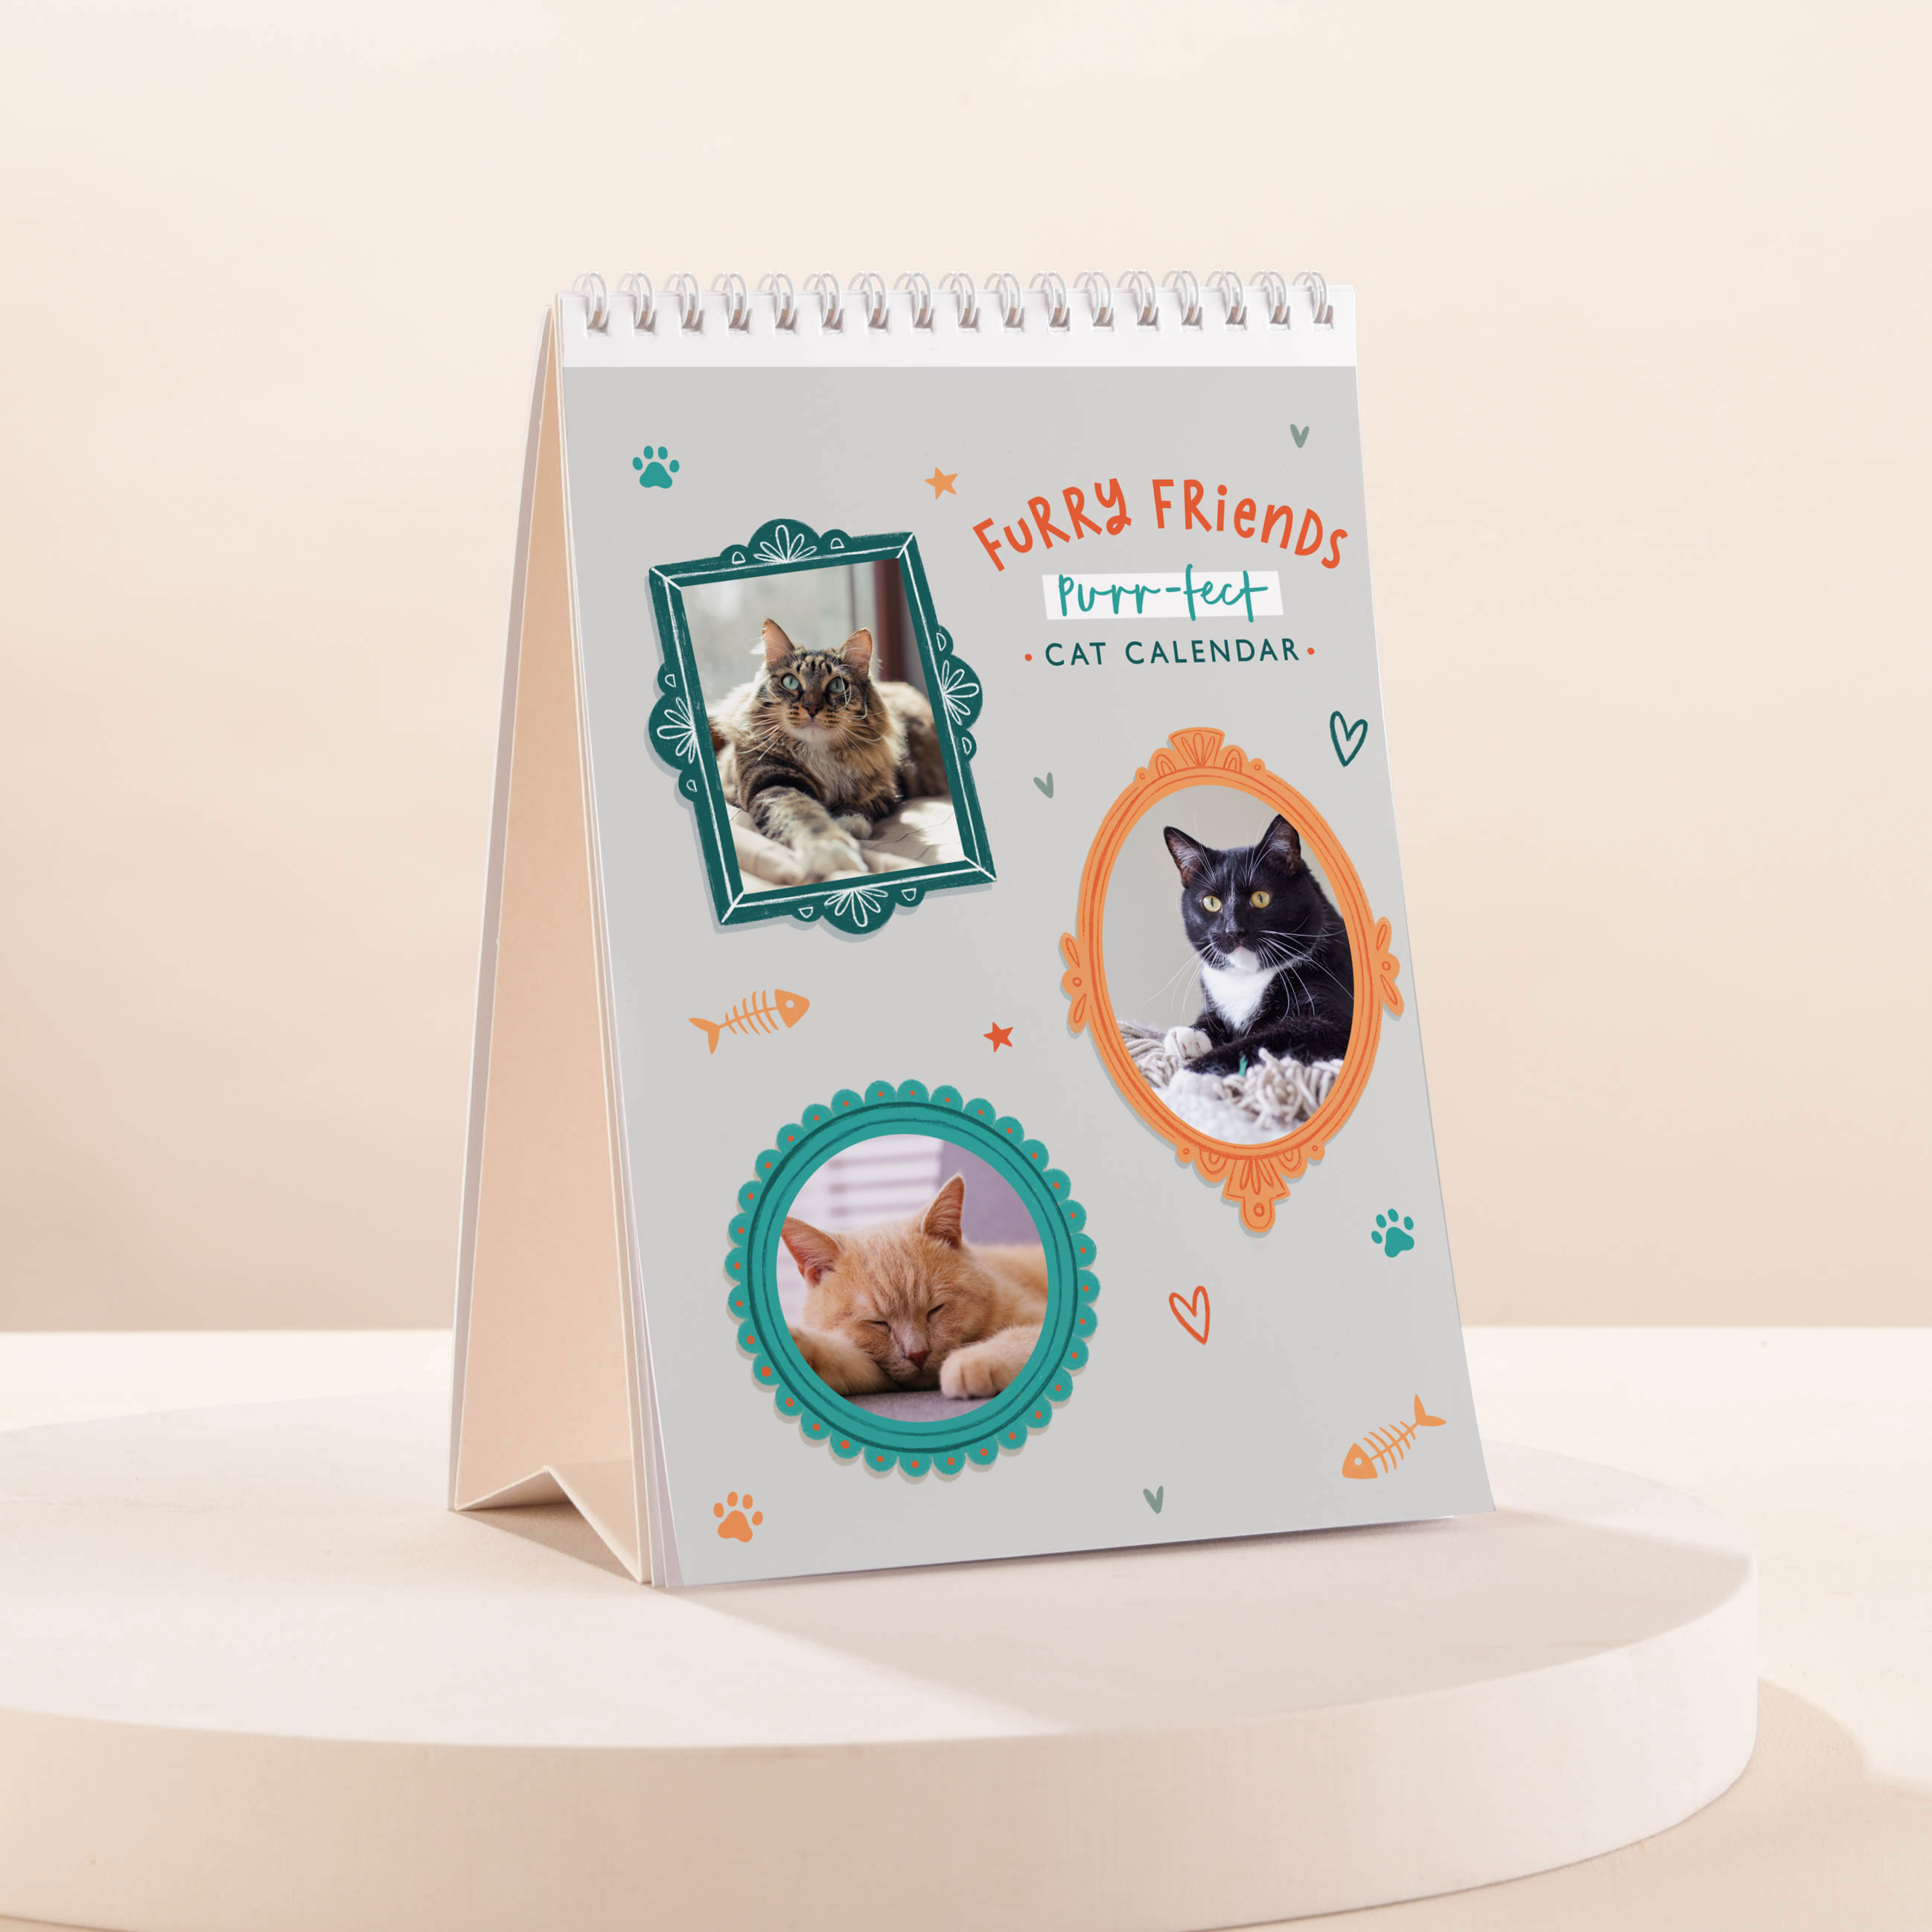 Personalised Photo Calendar - Furry Friends, Cats